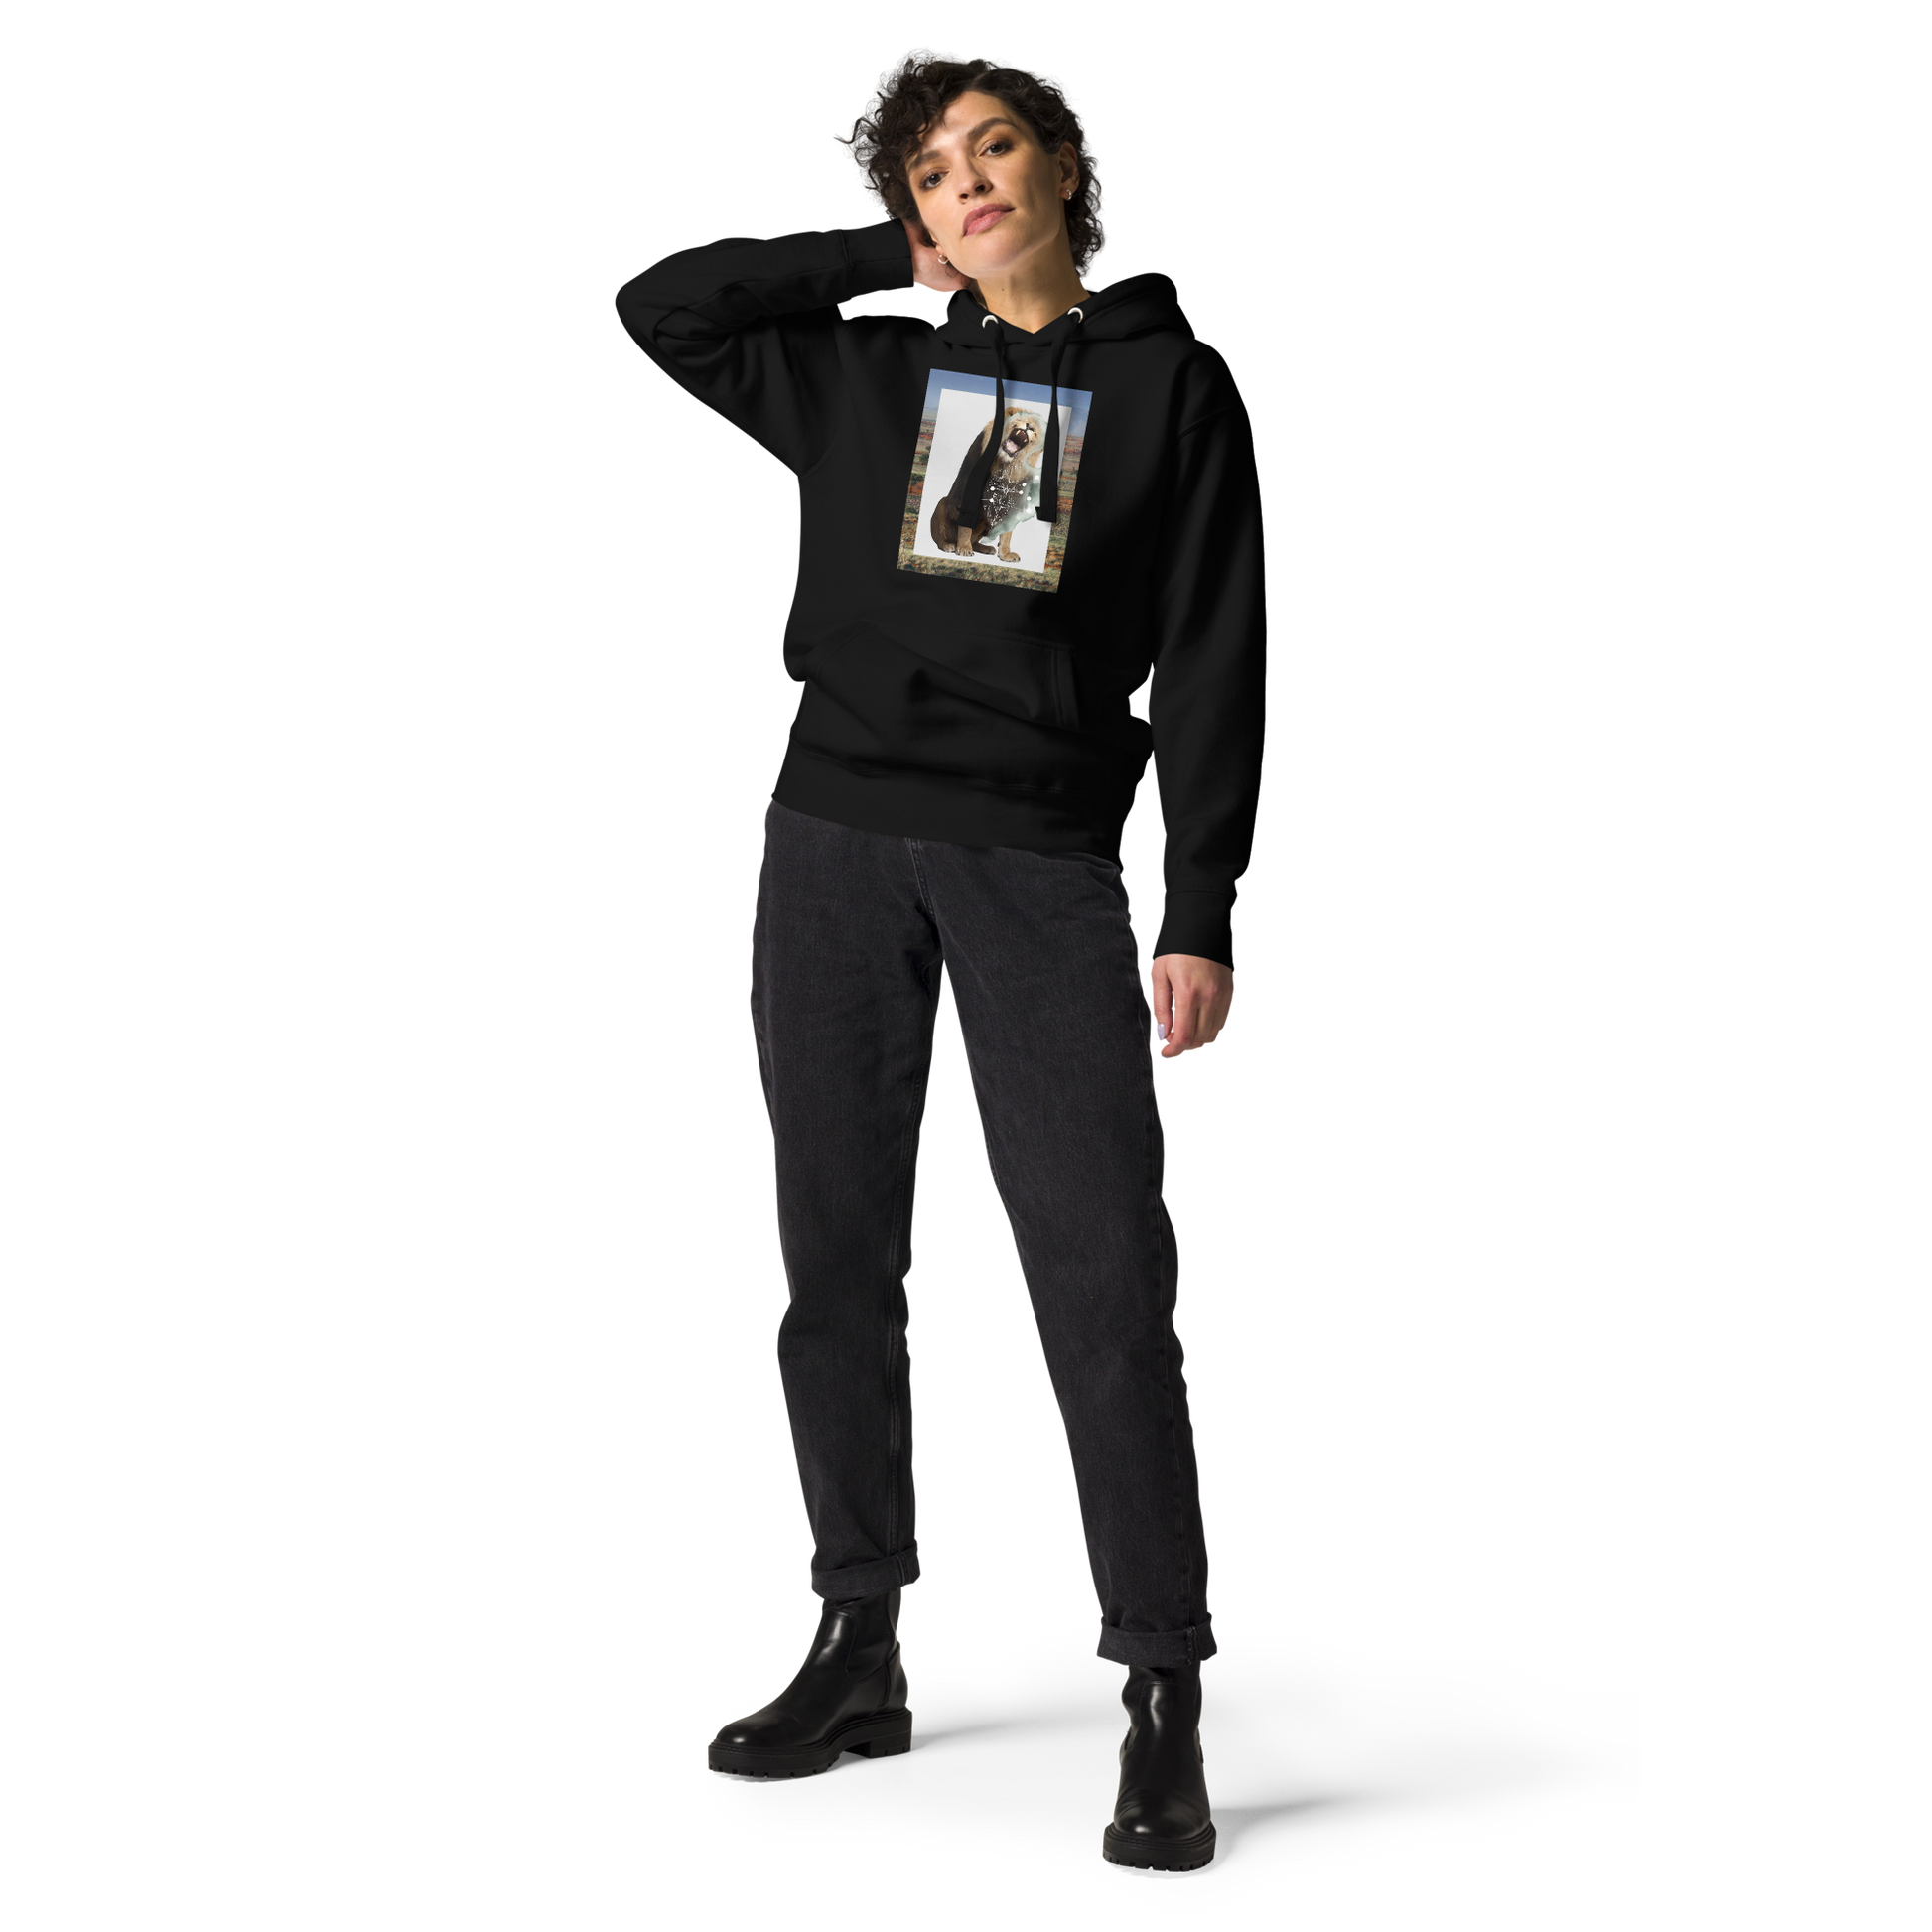 Woman wearing a Black Premium Lion Hoodie featuring a fierce Roaring Lion graphic on the chest - Cool Graphic Lion Hoodies - Boozy Fox